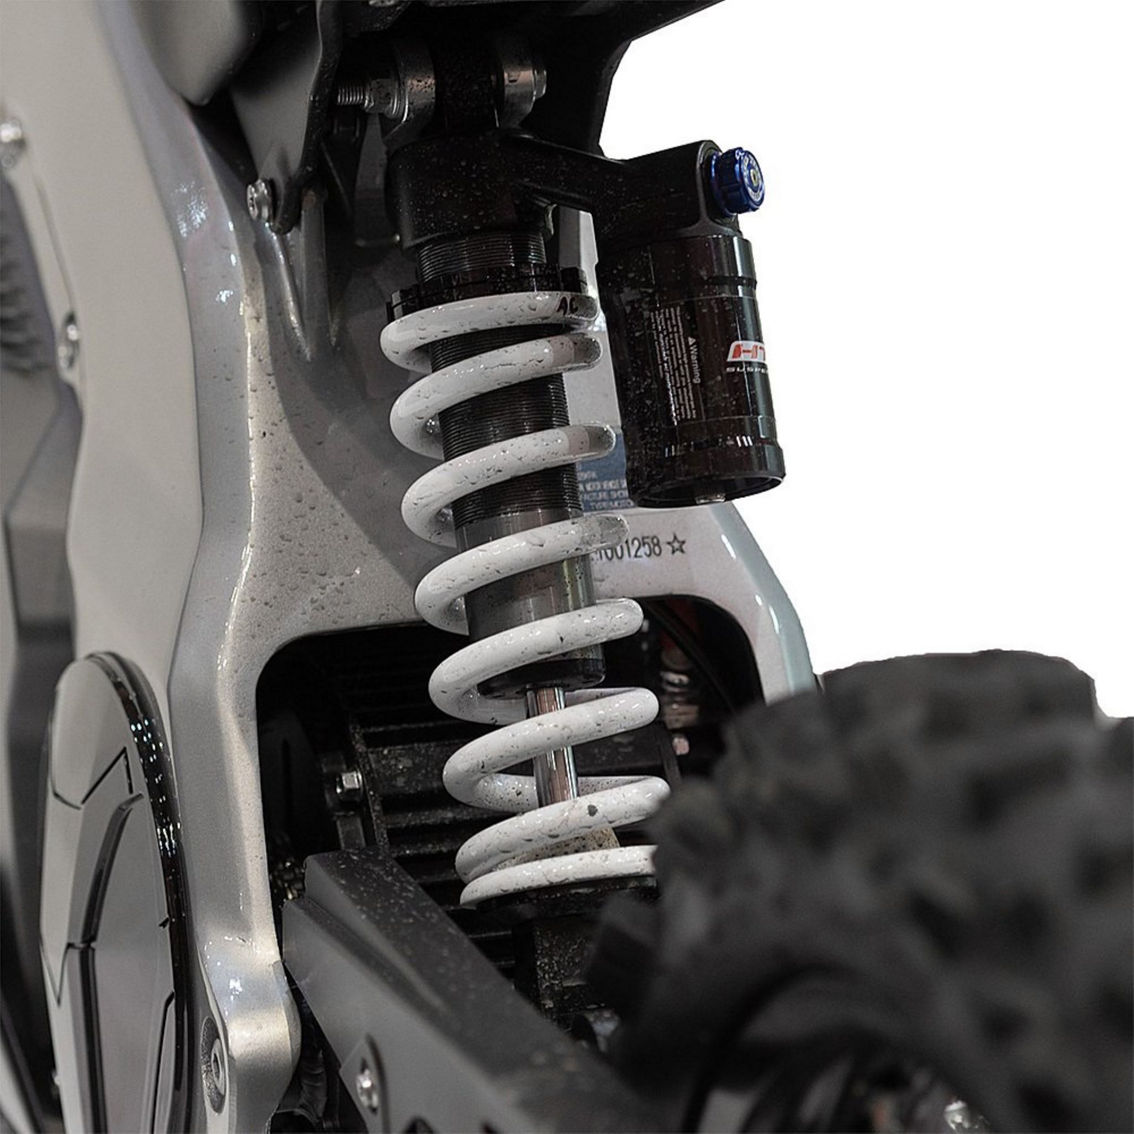 Go Trax Everest Electric Dirt Bike - Image 4 of 5